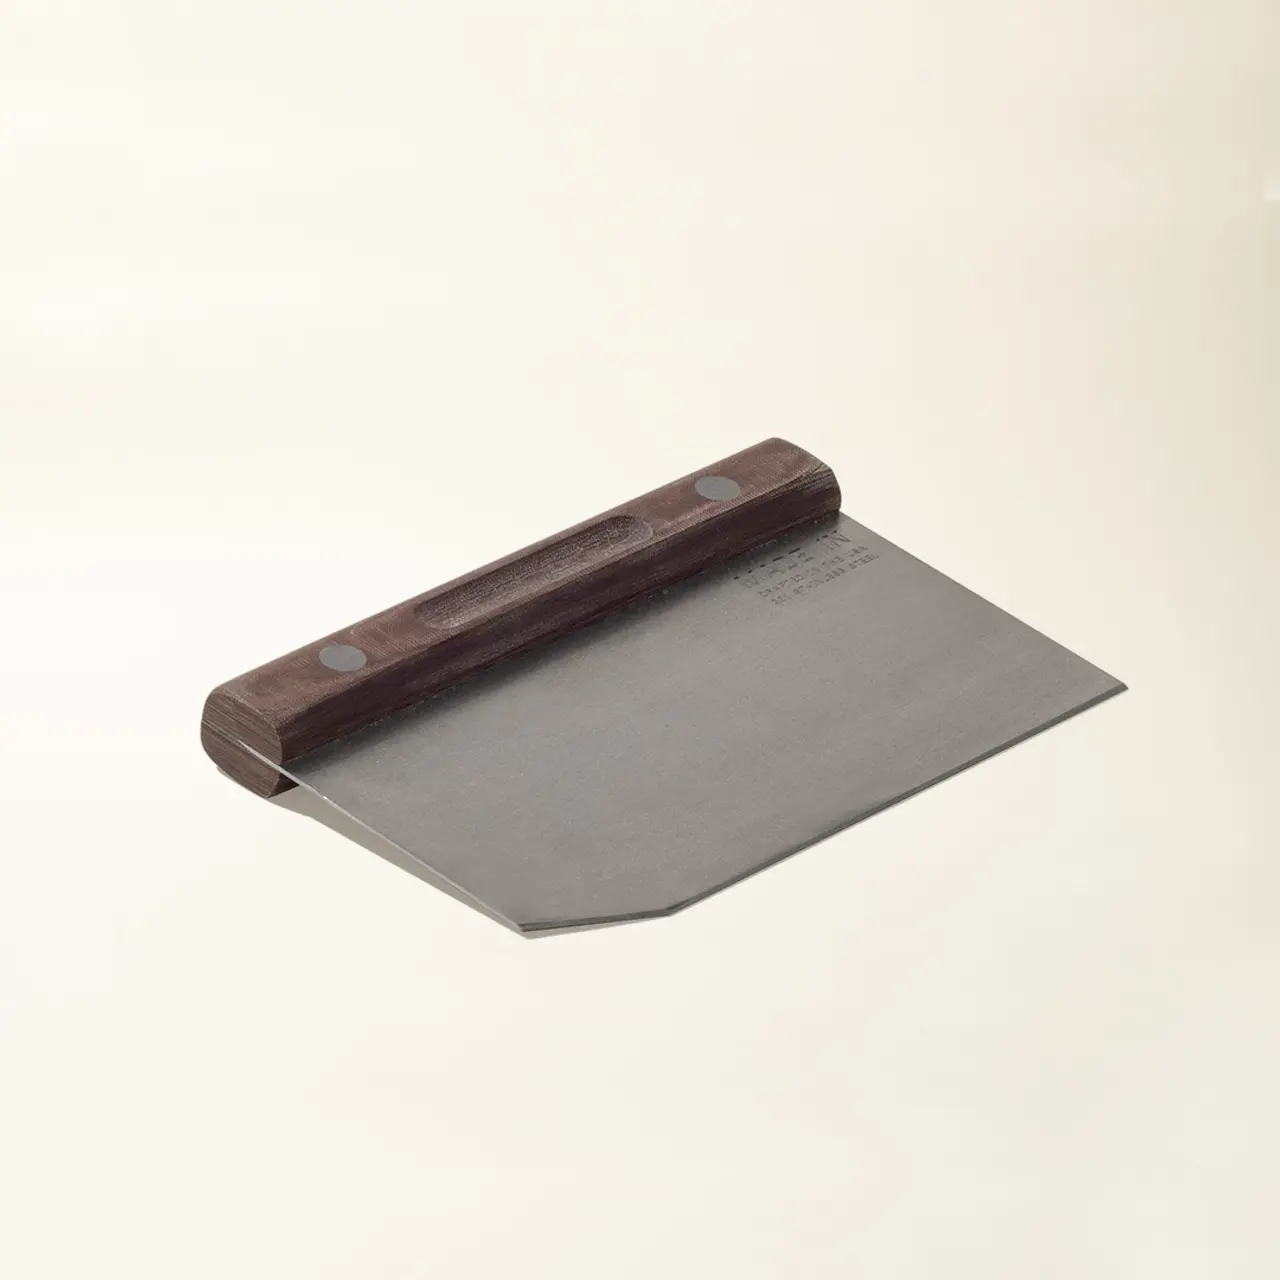 A stainless steel dough scraper with a wooden handle lies against a plain background.